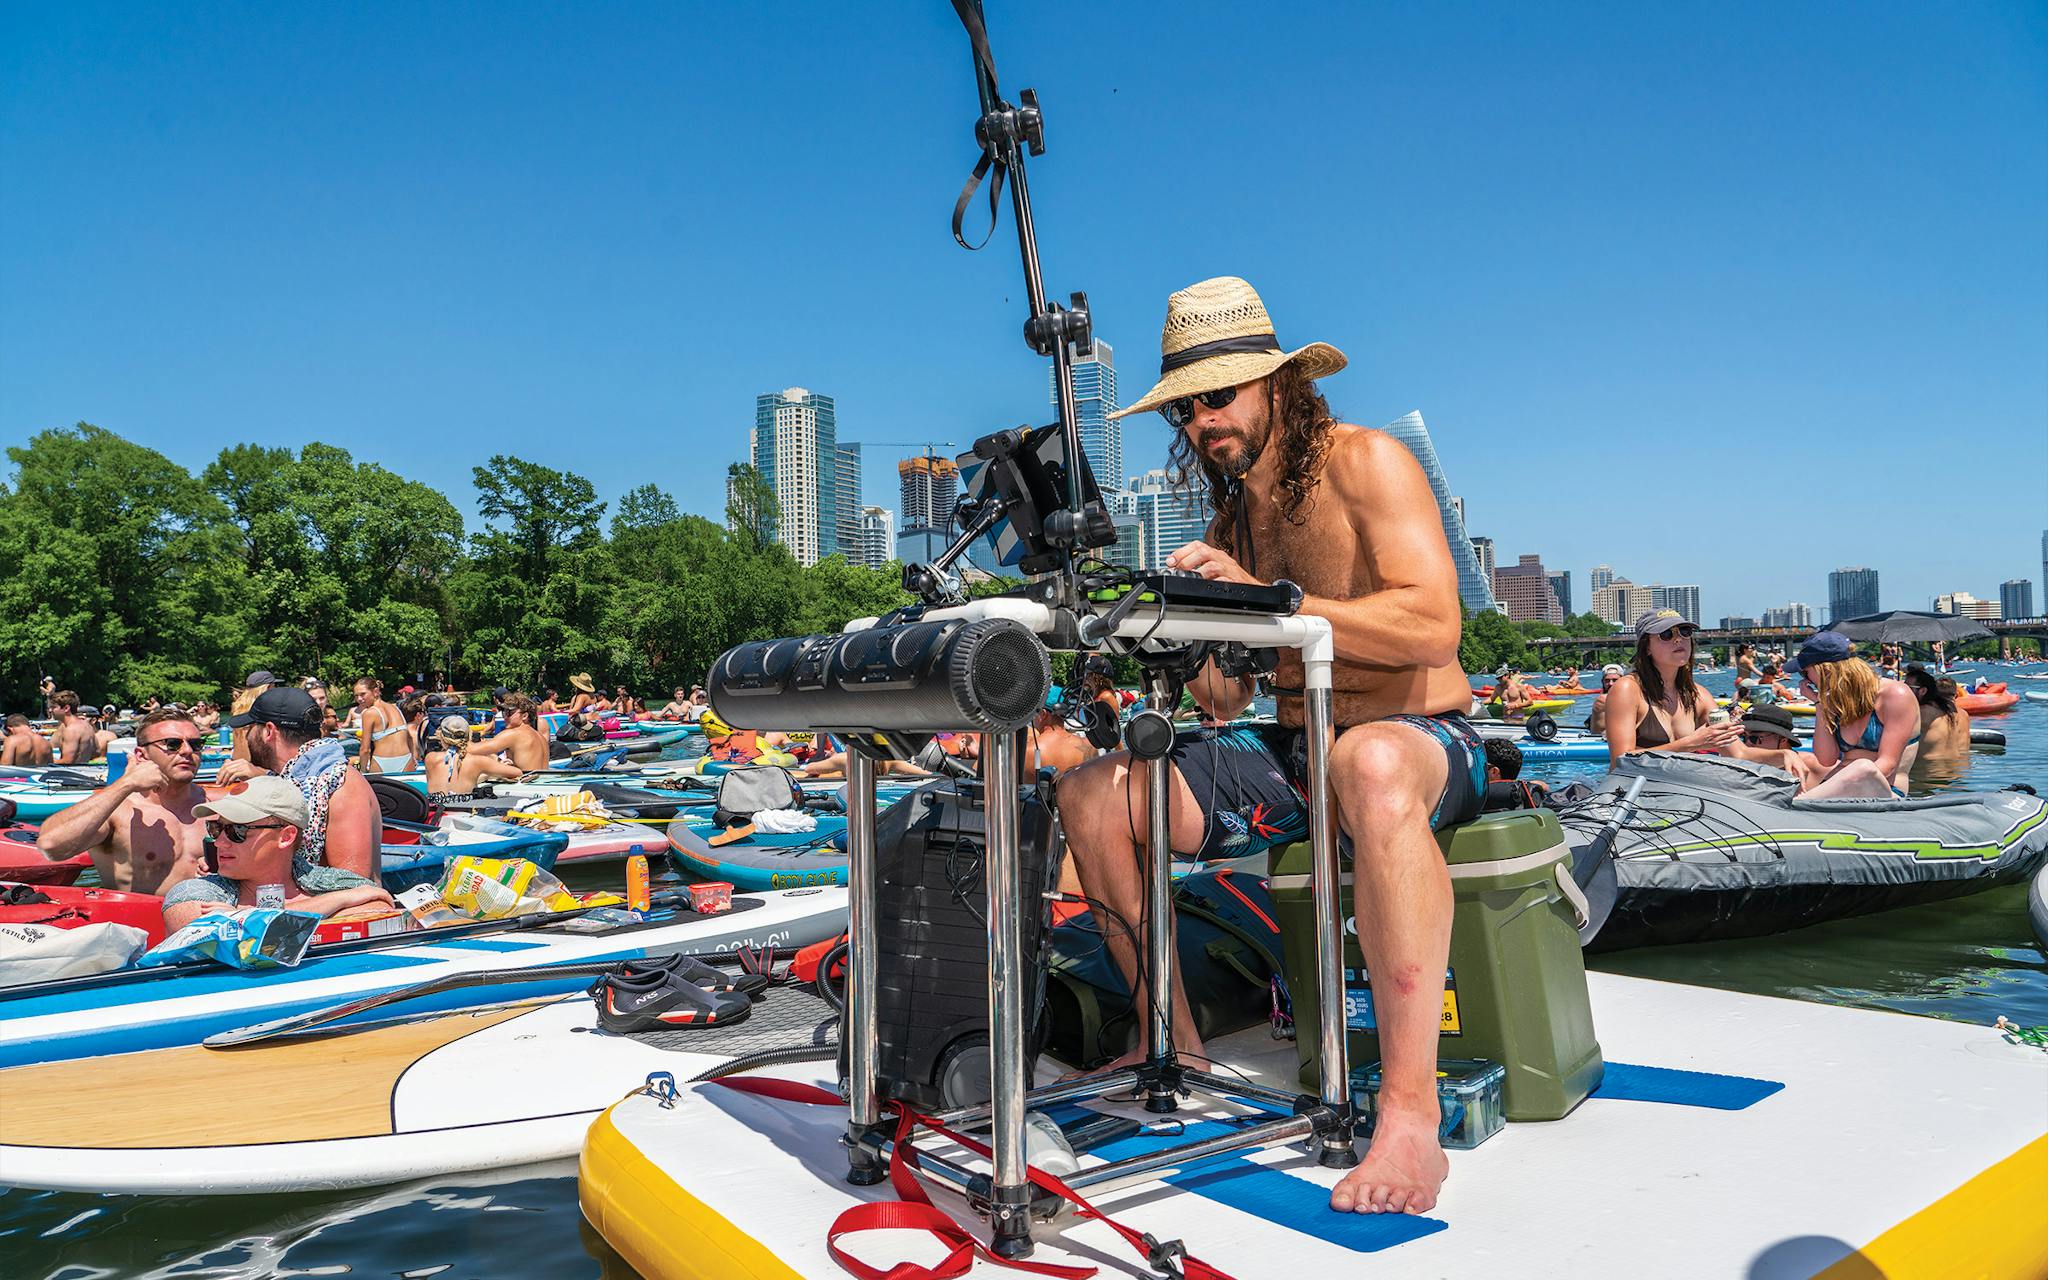 Dustin McInvale deejaying atop a large paddleboard.